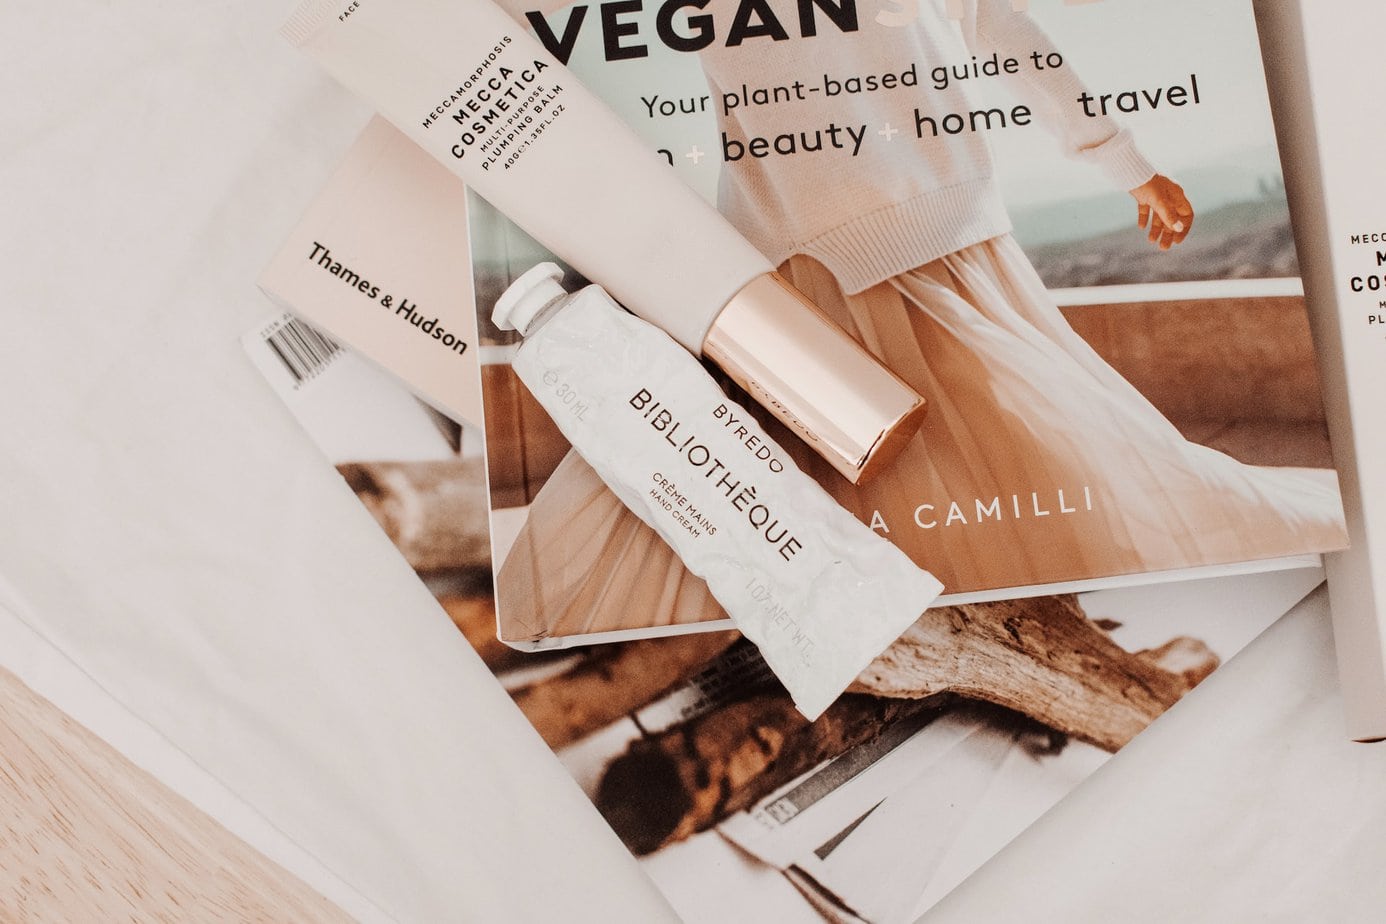 What ingredients must vegan cosmetics not contain?